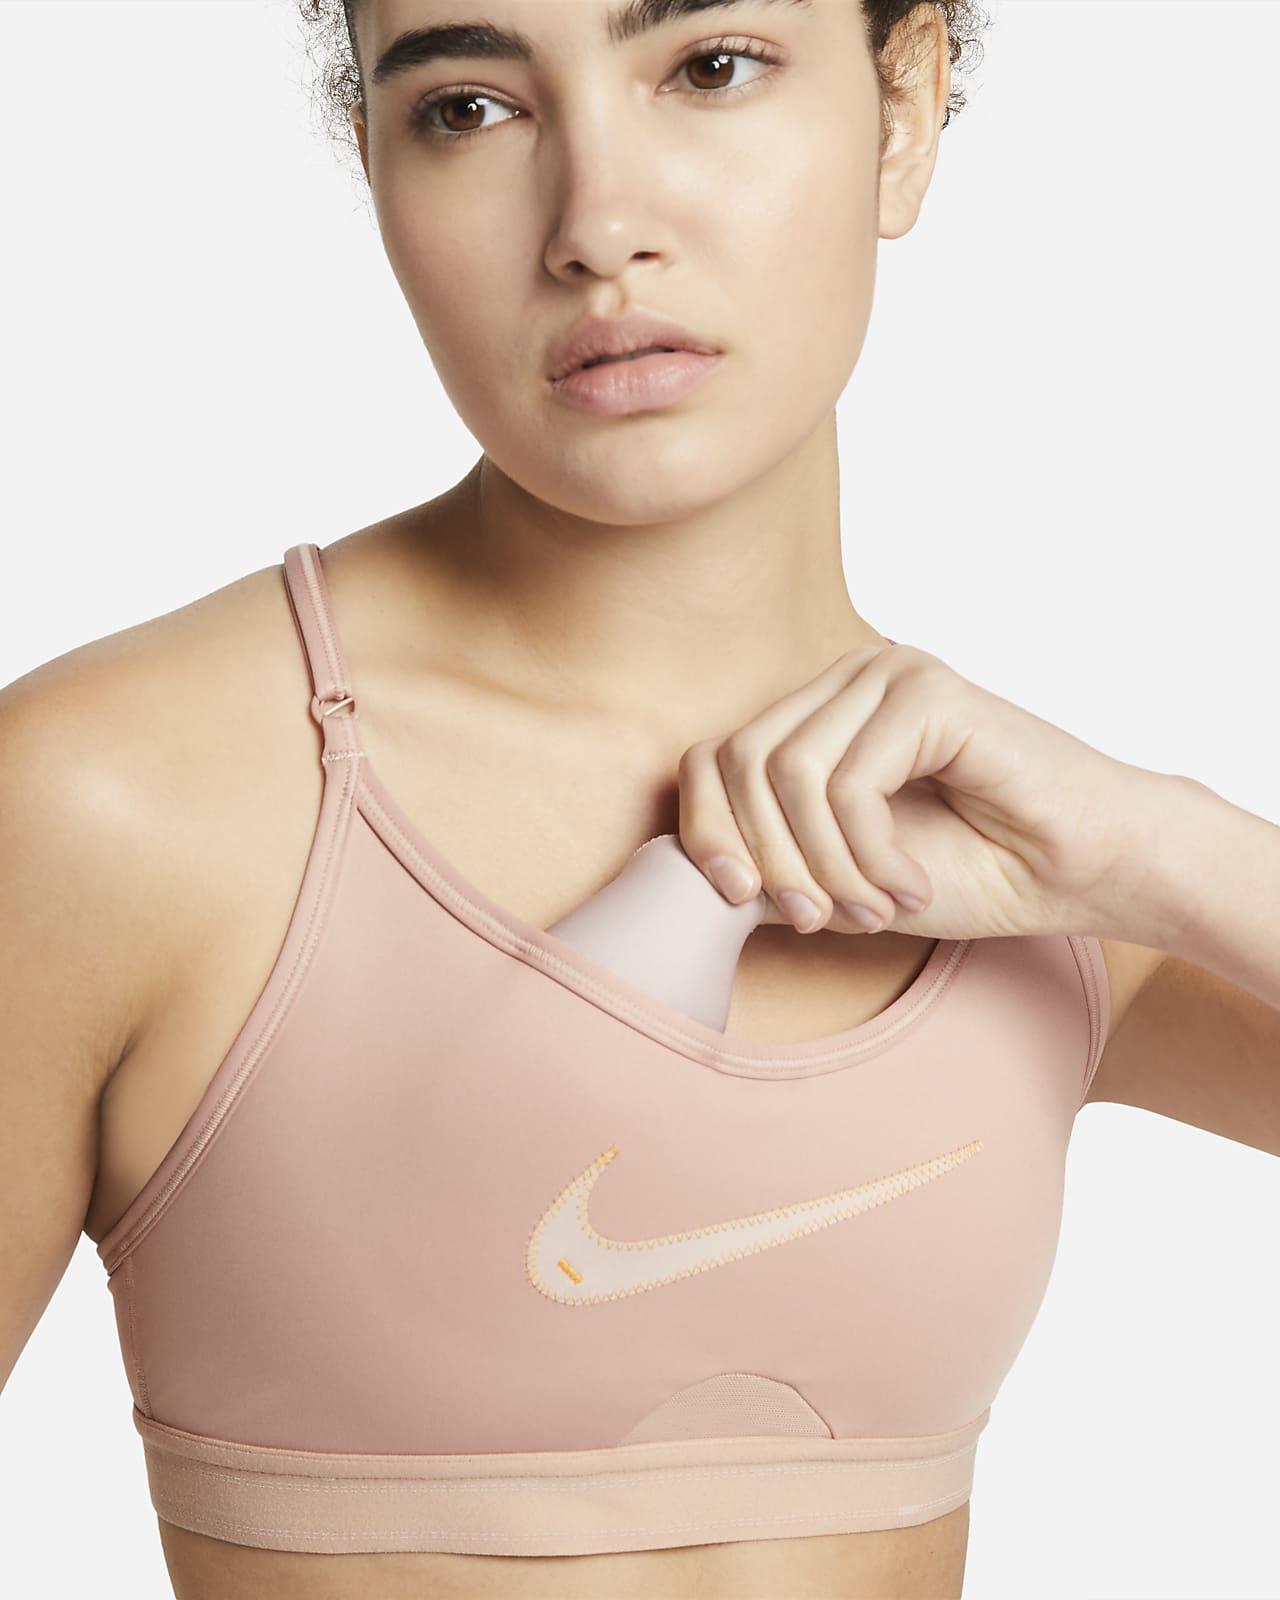 Nike Womens Light Support Indy Bra - Pink